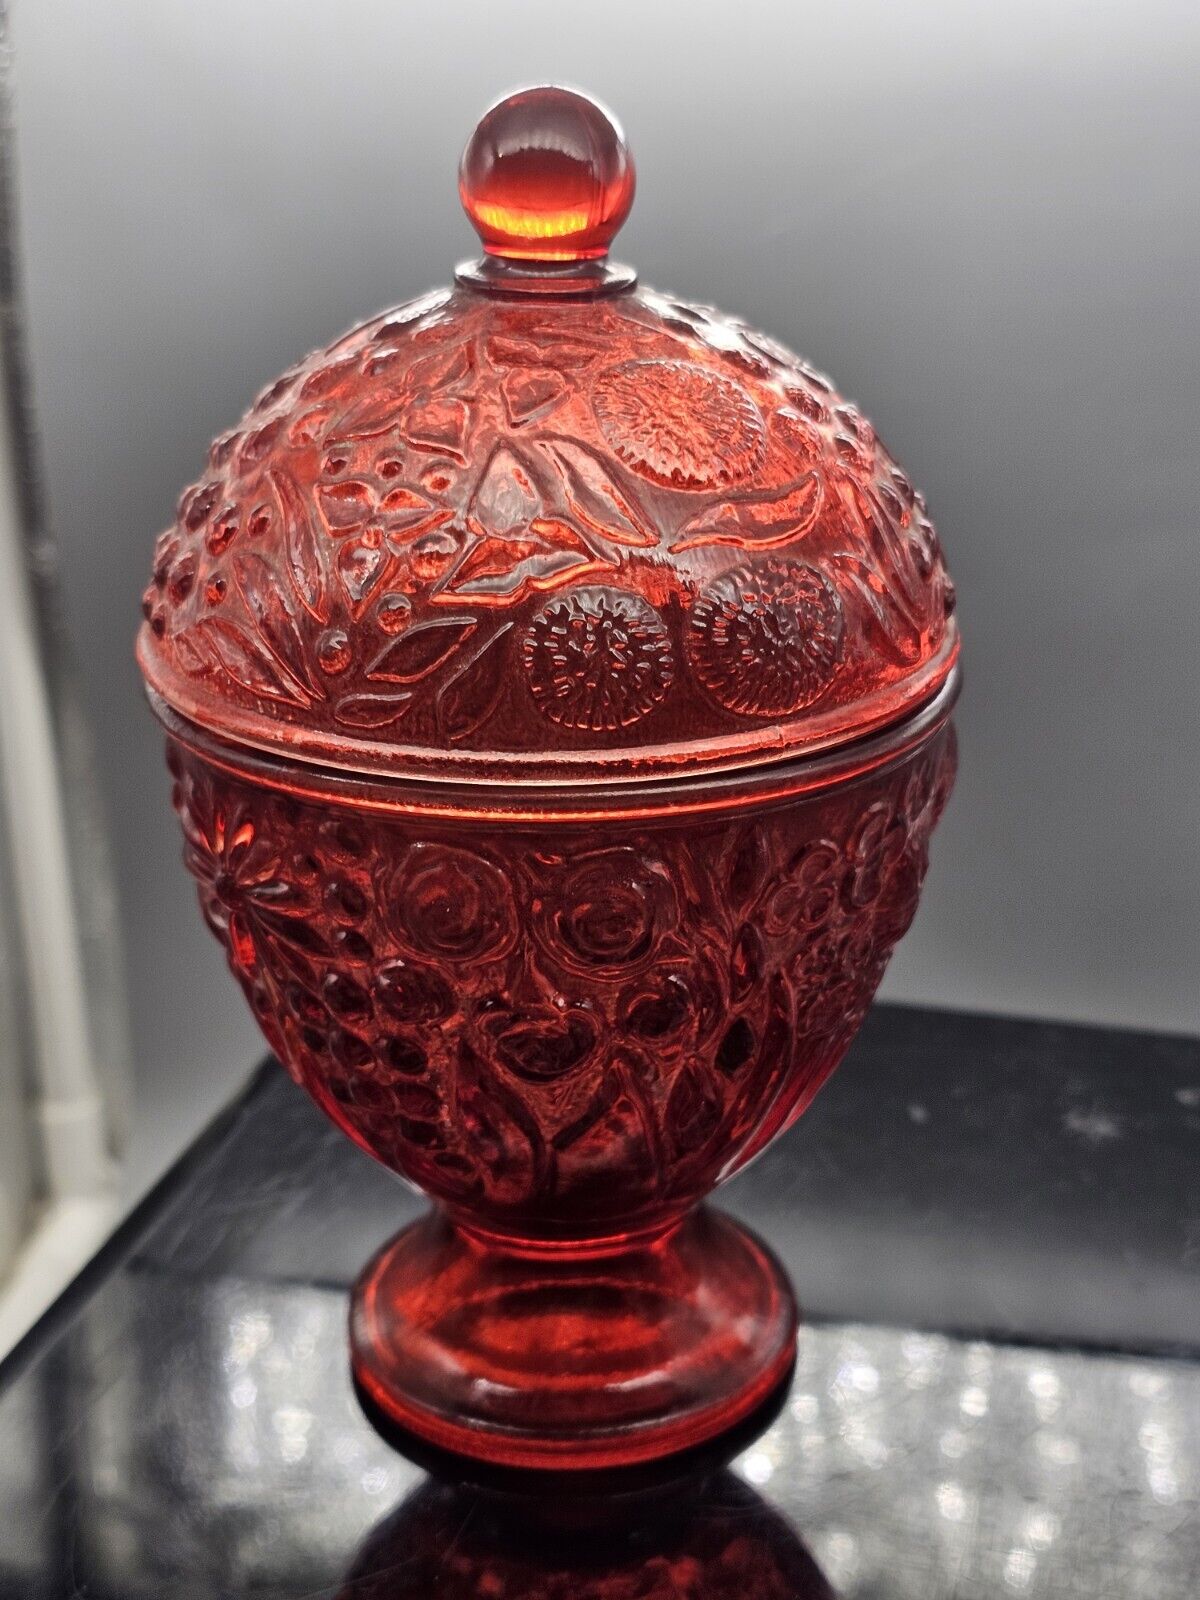 Avon Red Covered Compote Dish Candle Holder